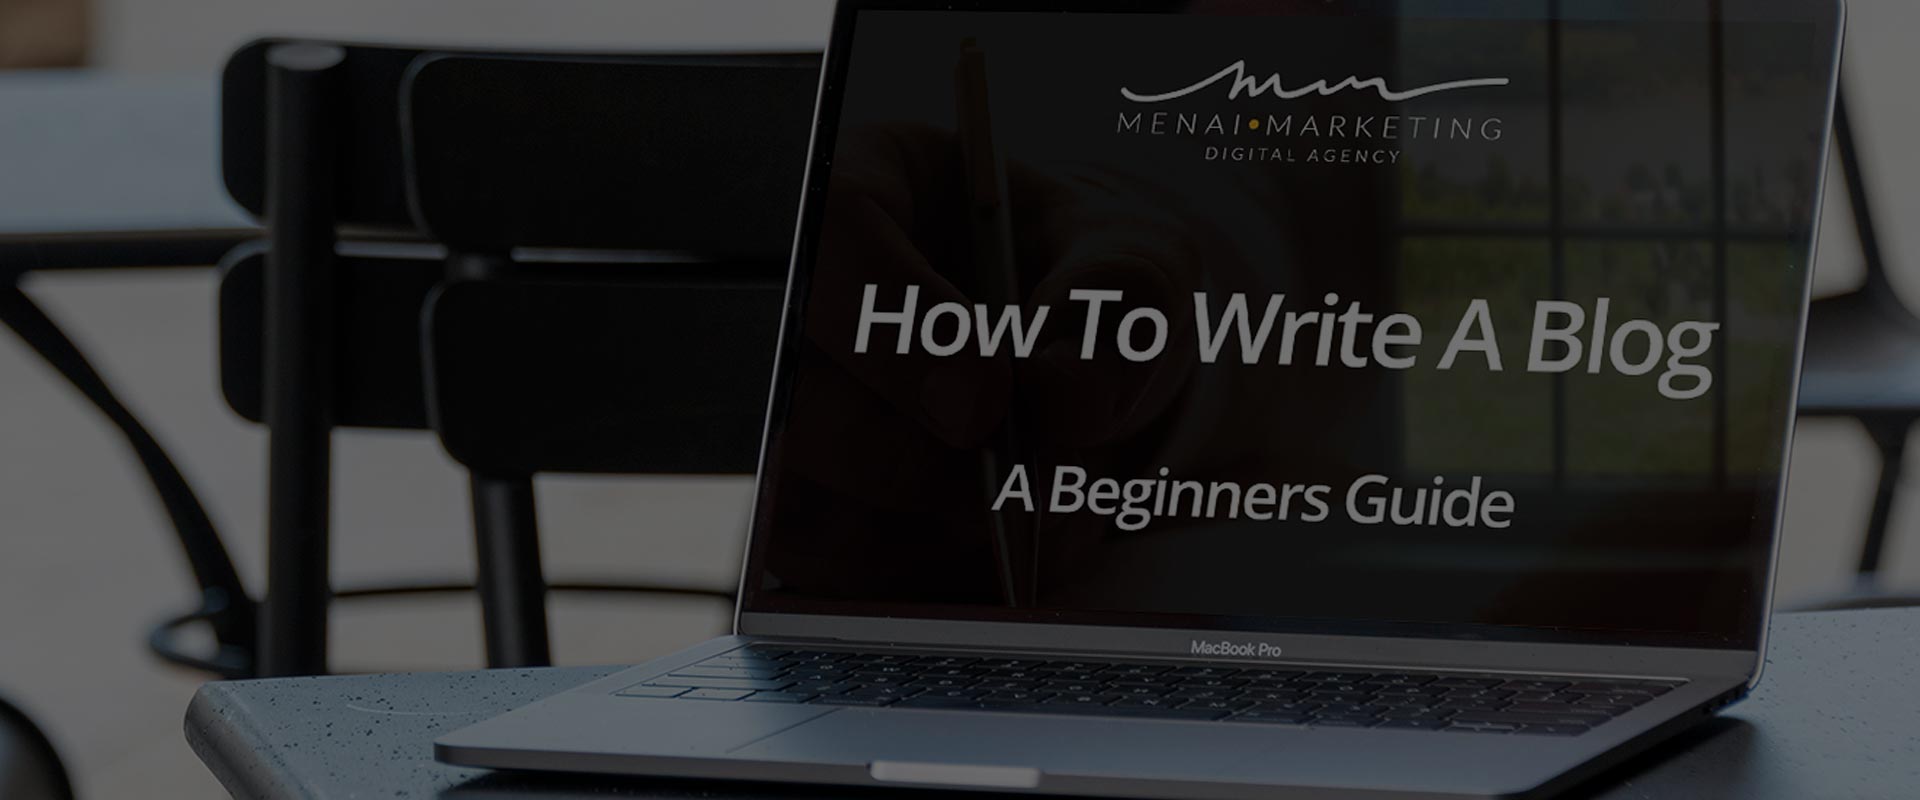 How To Write A Blog - a Beginners Guide